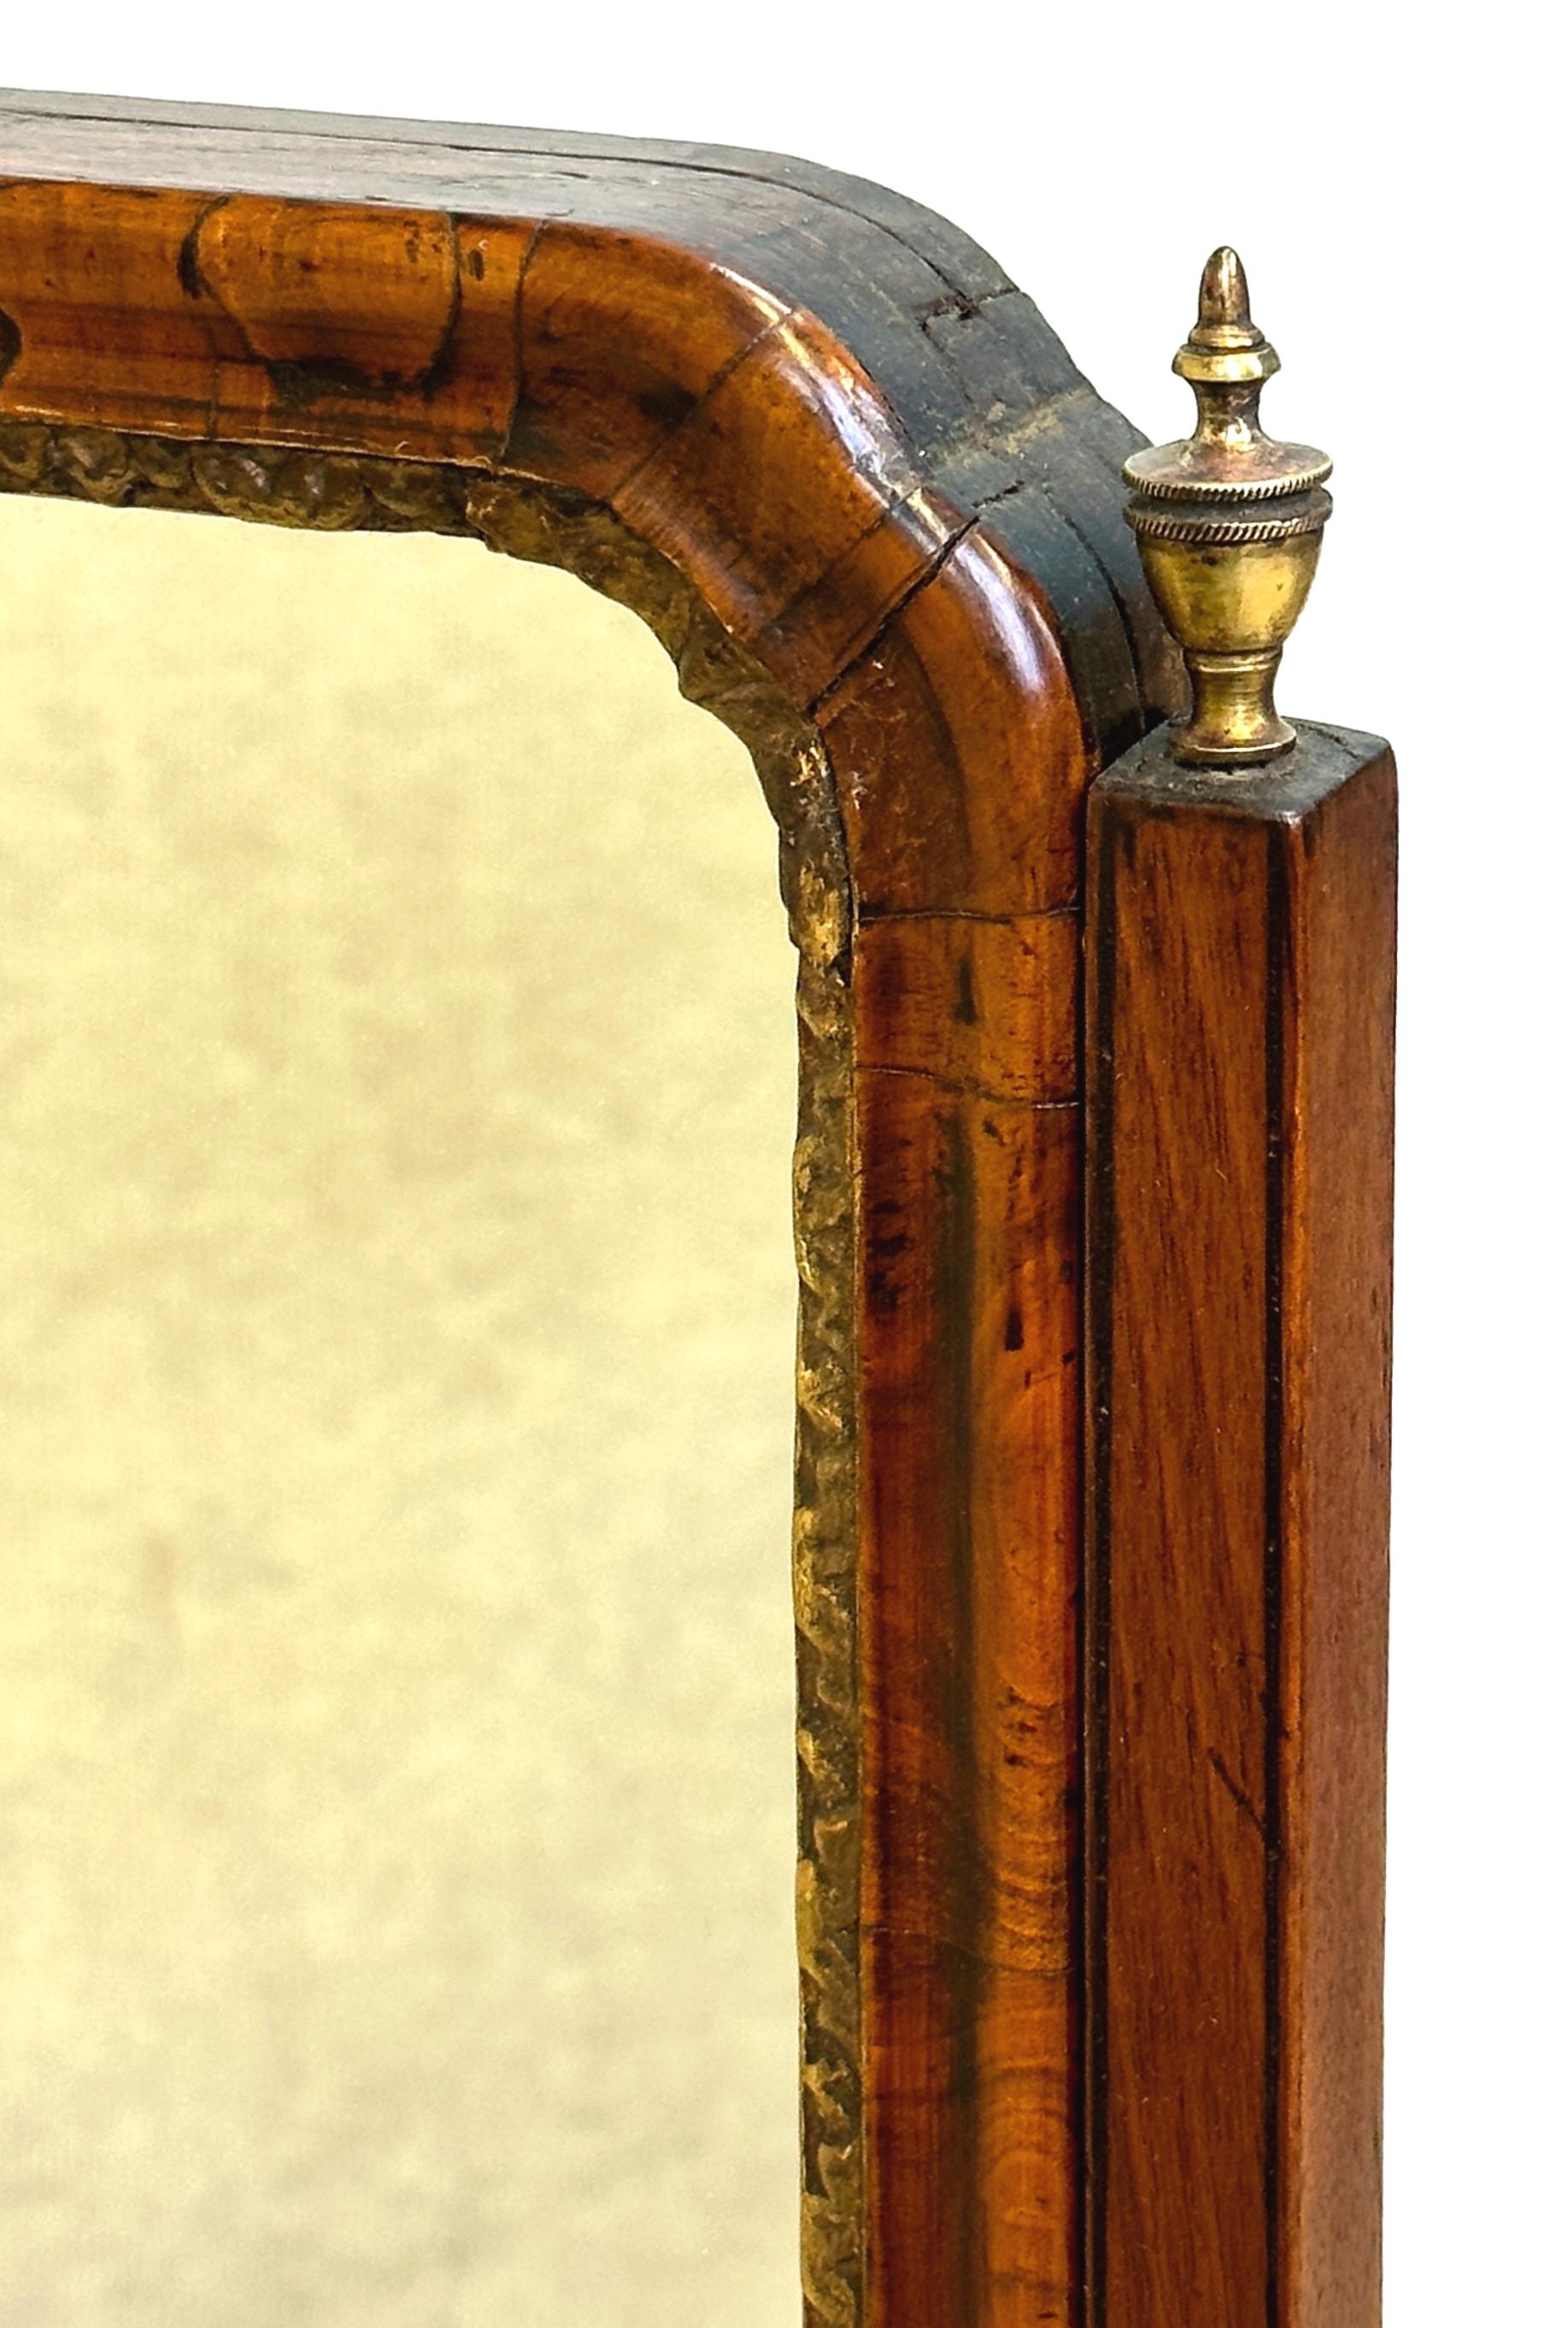 A Good Quality And Very Attractive, Early 18th Century, George I Period. Walnut Dressing Table Mirror, Having Elegant Frame Enclosing Replacement Mirror Plate, Over Superbly Figured Three Drawer Box Base And Original Bracket Feet.

Dressing table